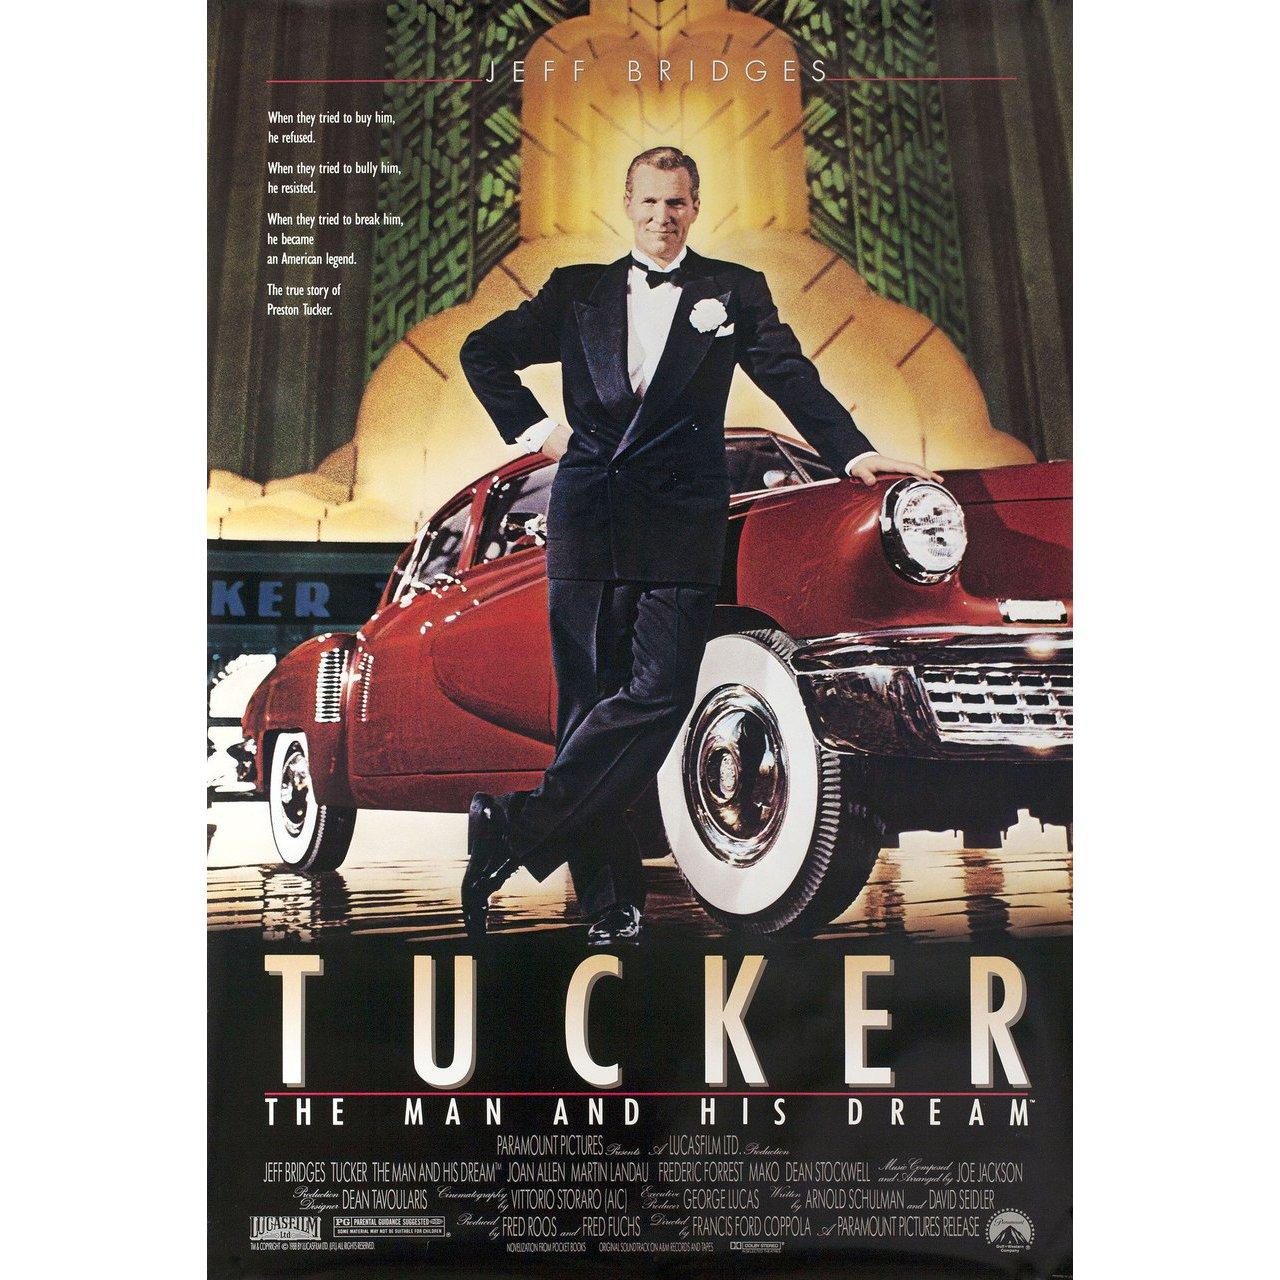 Original 1988 U.S. one sheet poster for the film Tucker: The Man and His Dream directed by Francis Ford Coppola with Jeff Bridges / Joan Allen / Martin Landau / Frederic Forrest. Very Good-Fine condition, rolled. Please note: the size is stated in